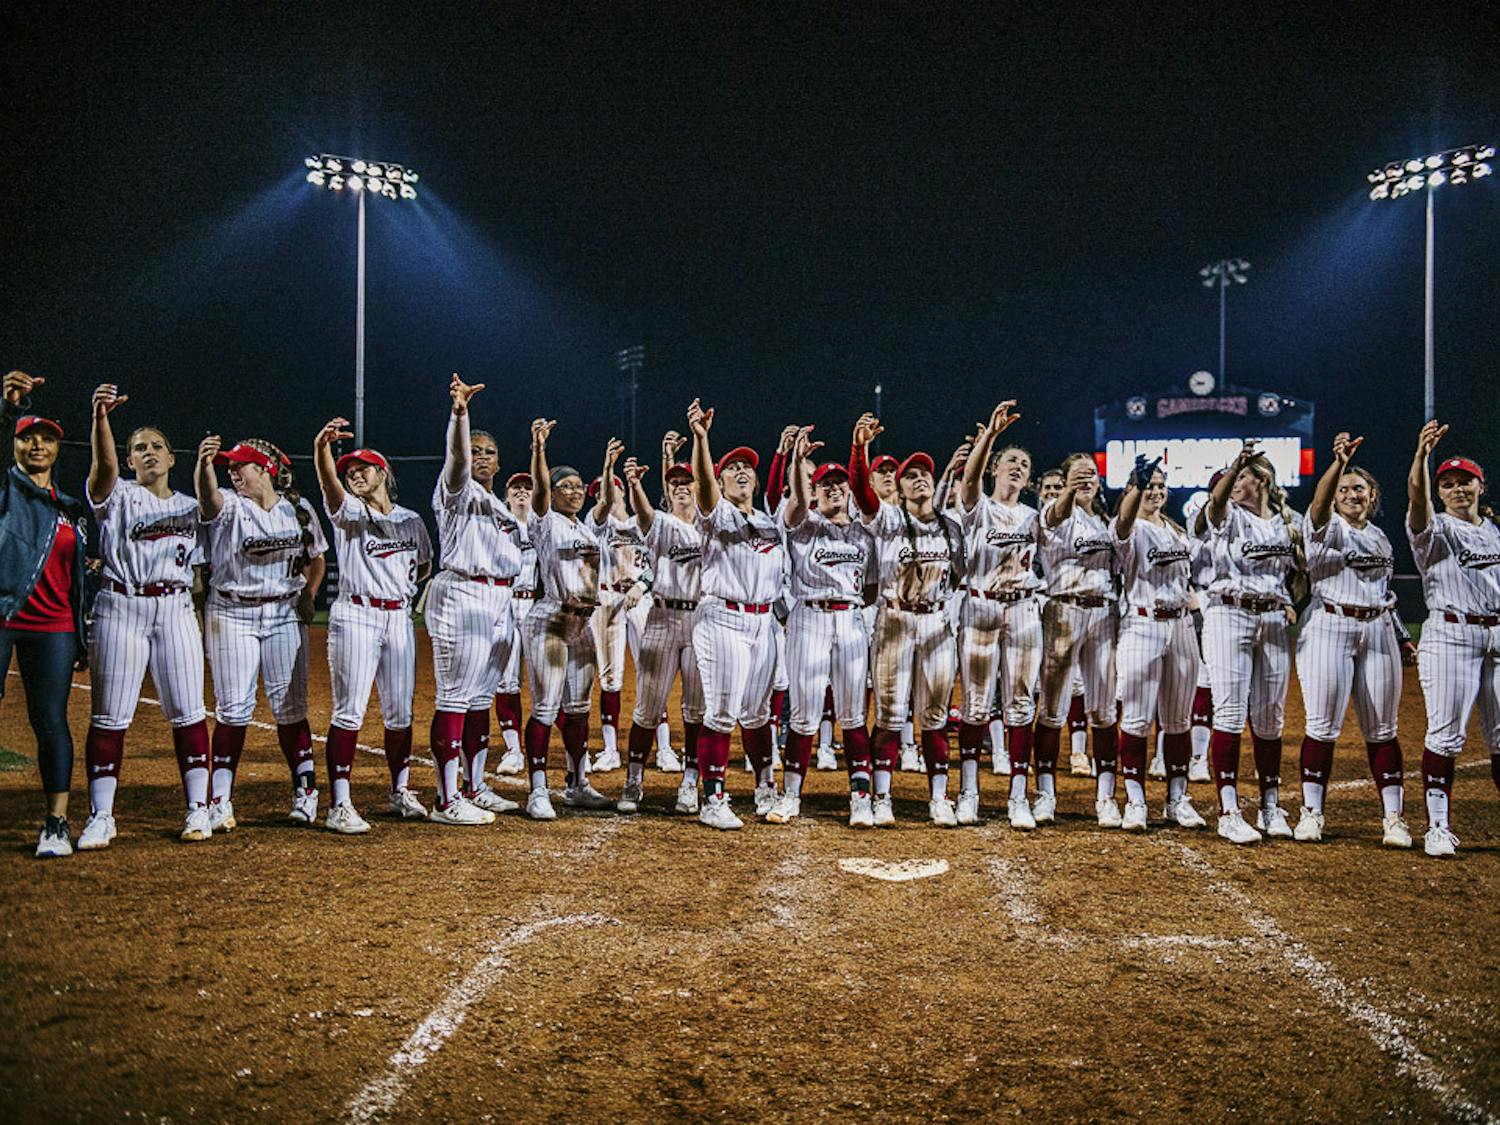 The Gamecock softball team offers a toast to the crowd after winning their home opener against the College of Charleston at Carolina Softball Stadium at Beckham Field on February 15, 2023. The Gamecocks beat the Cougars 8-0.&nbsp;